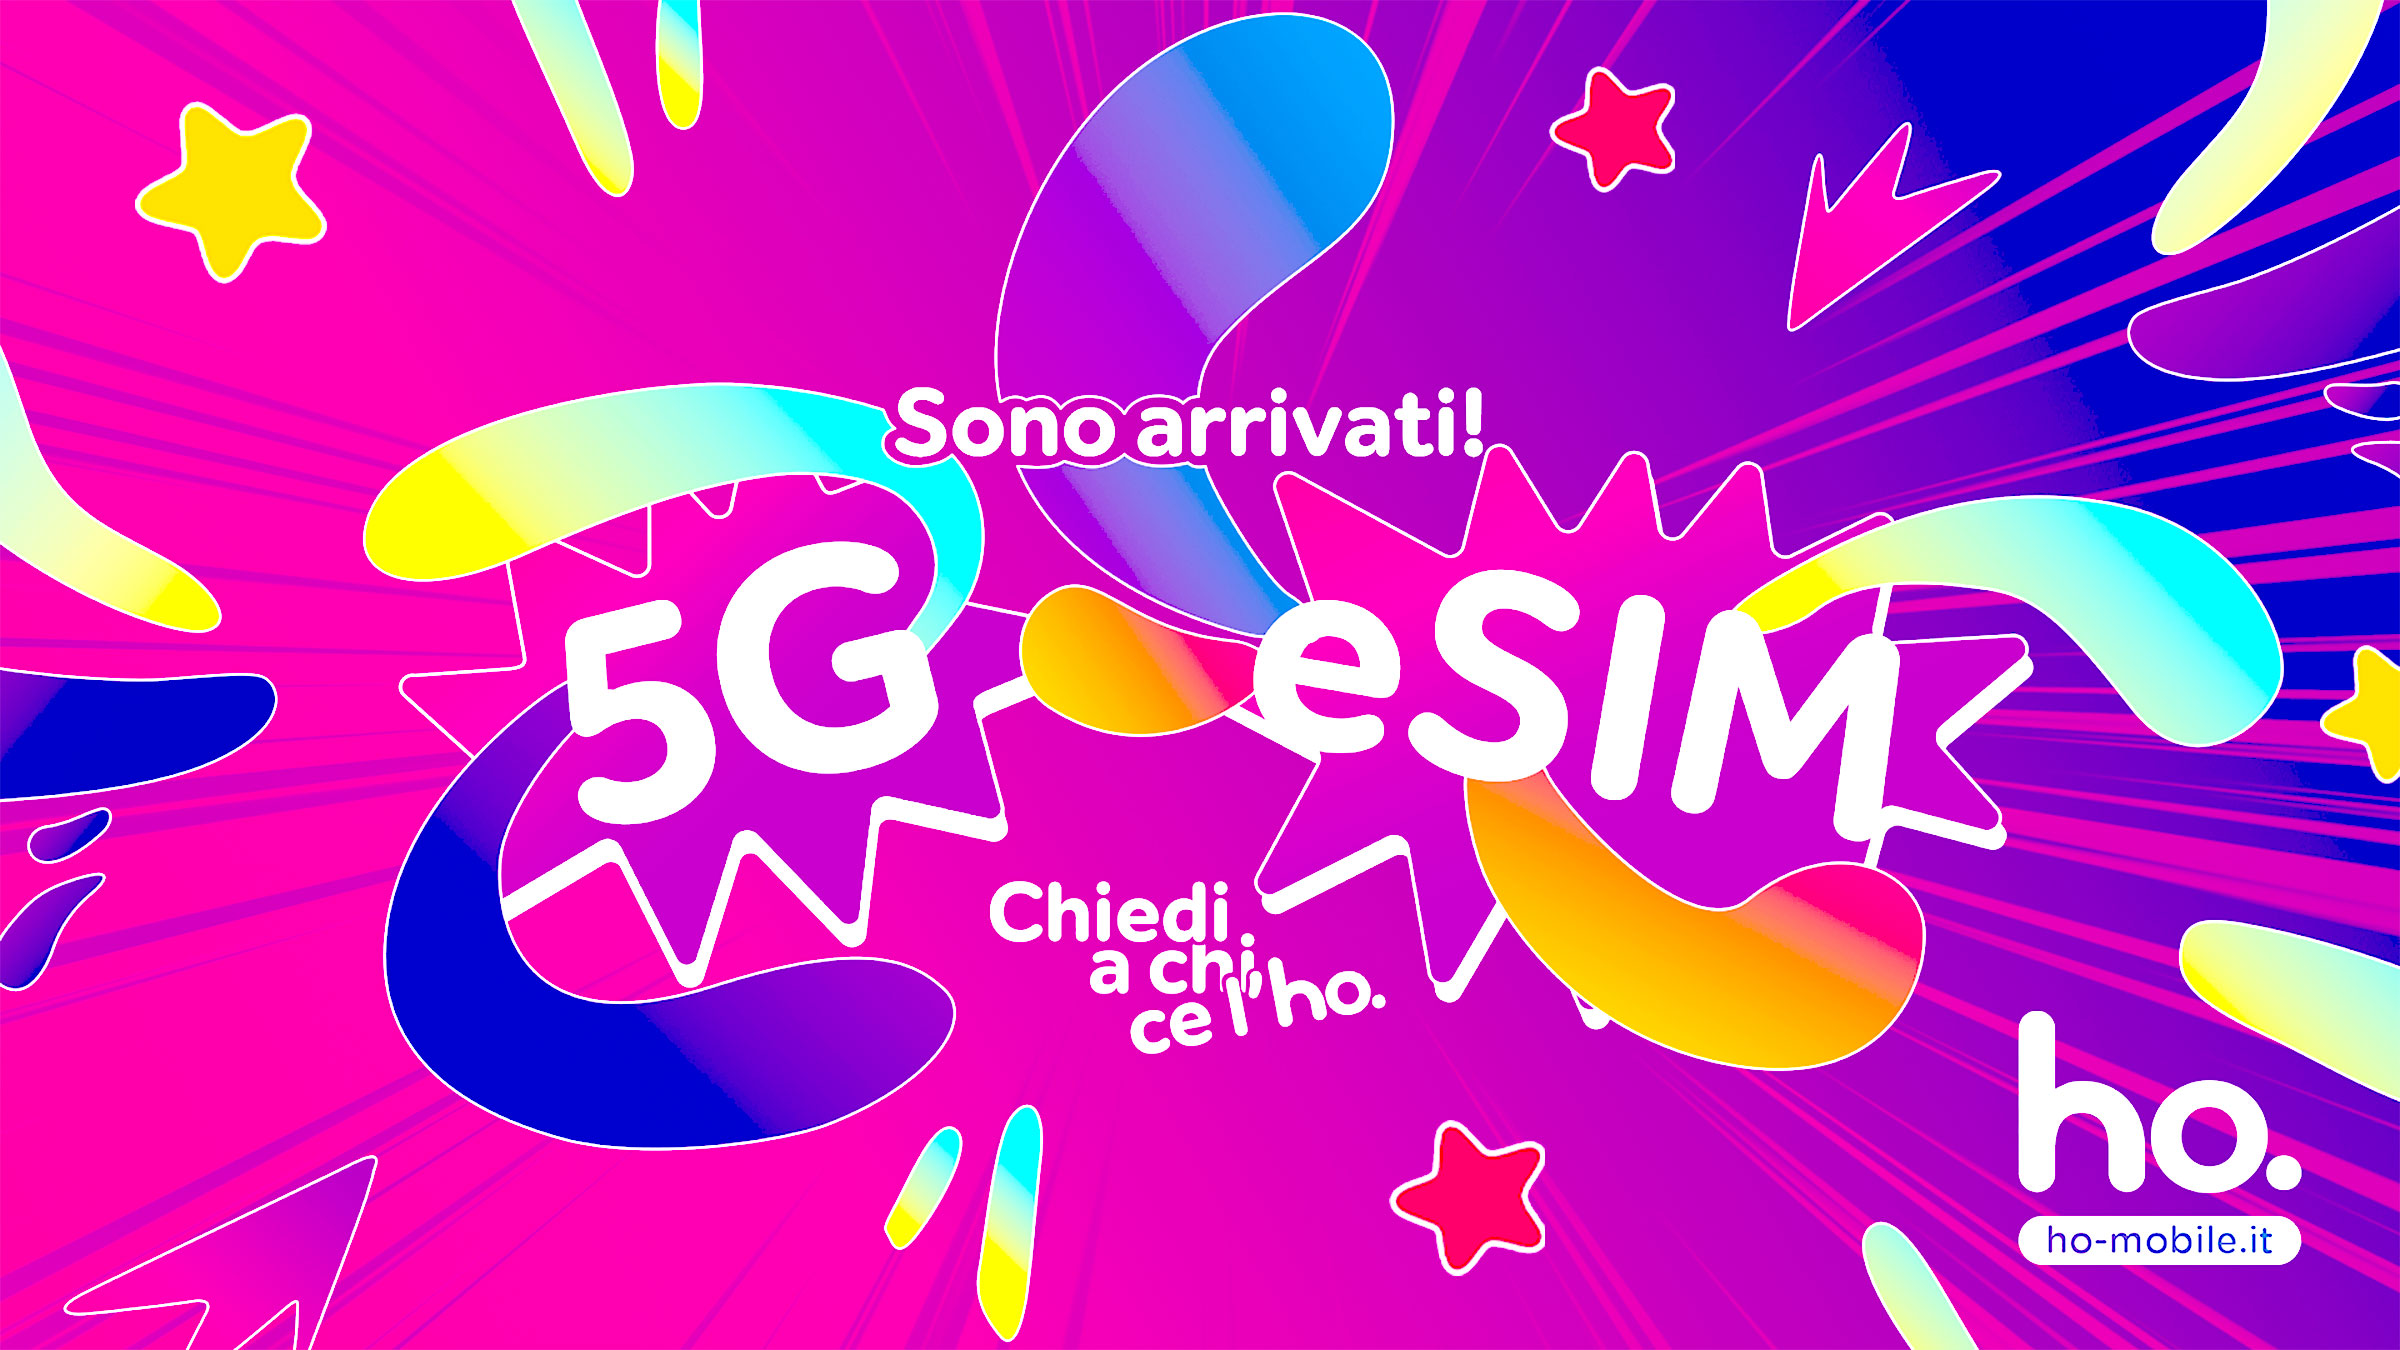 the new 5G and eSIM offers